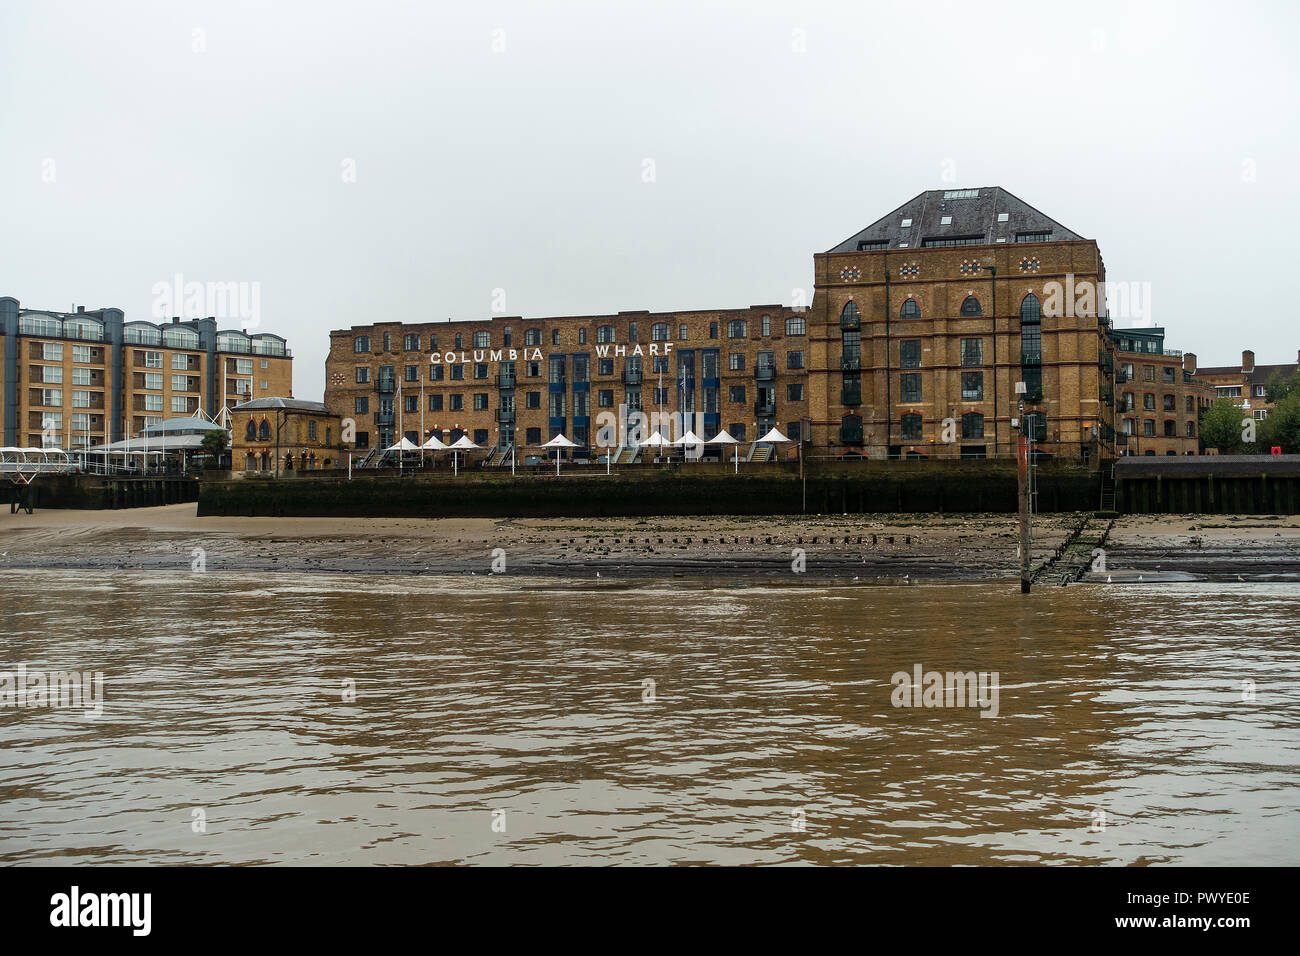 The Former Columbia Wharf Warehouse and Silo Building, now Housing and a Hotel on River Thames Rotherhide Southwark London England United Kingdom UK Stock Photo